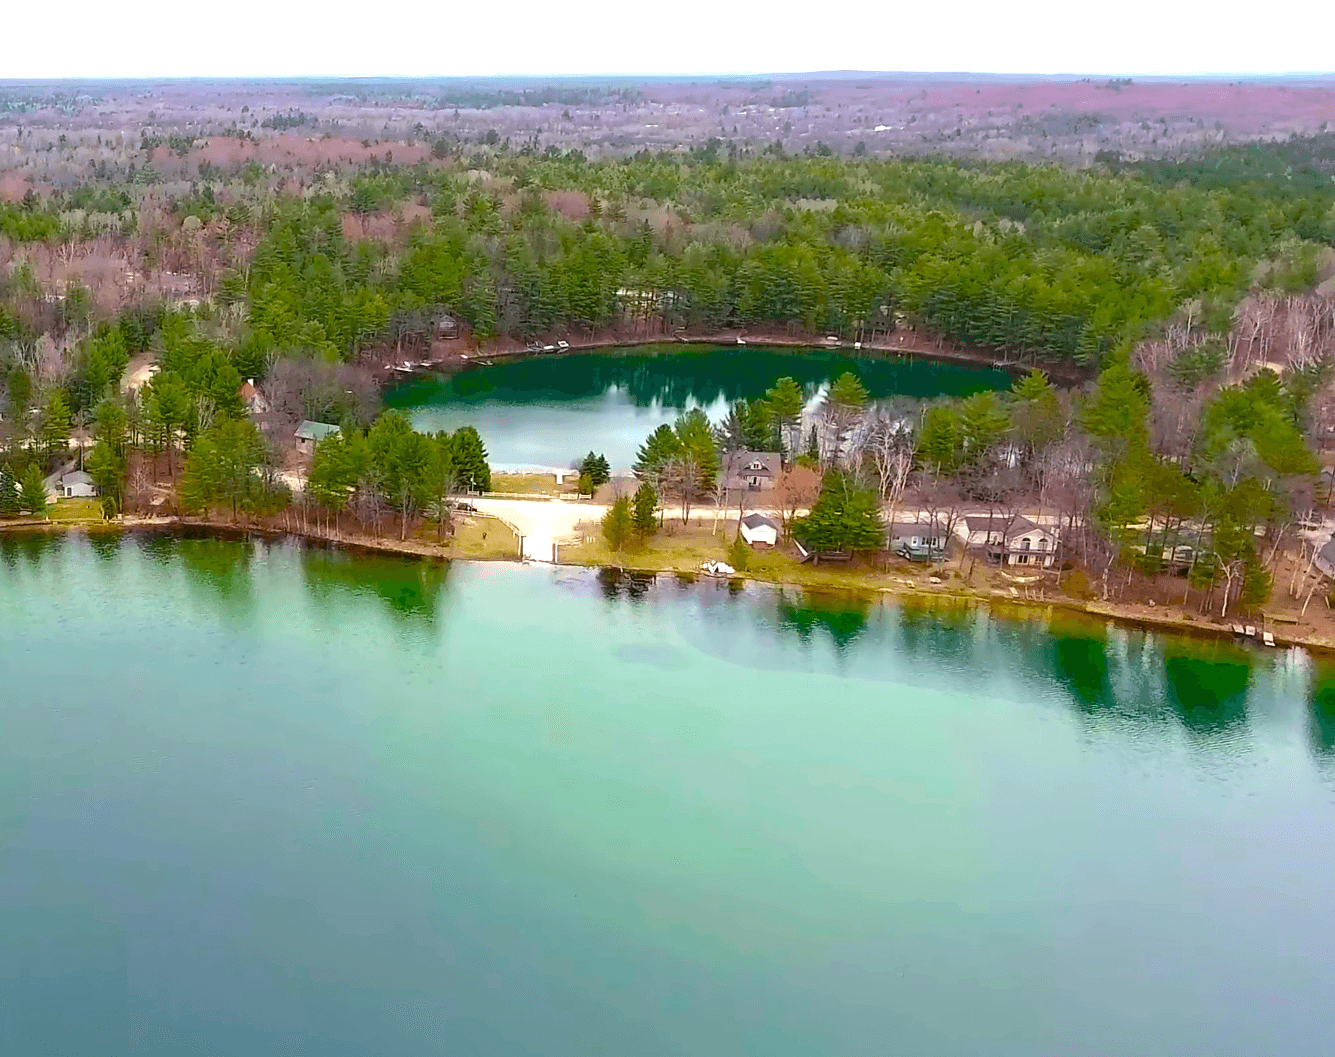 Gaylord, Michigan: Lake Arrowhead's Exclusive Private Community!